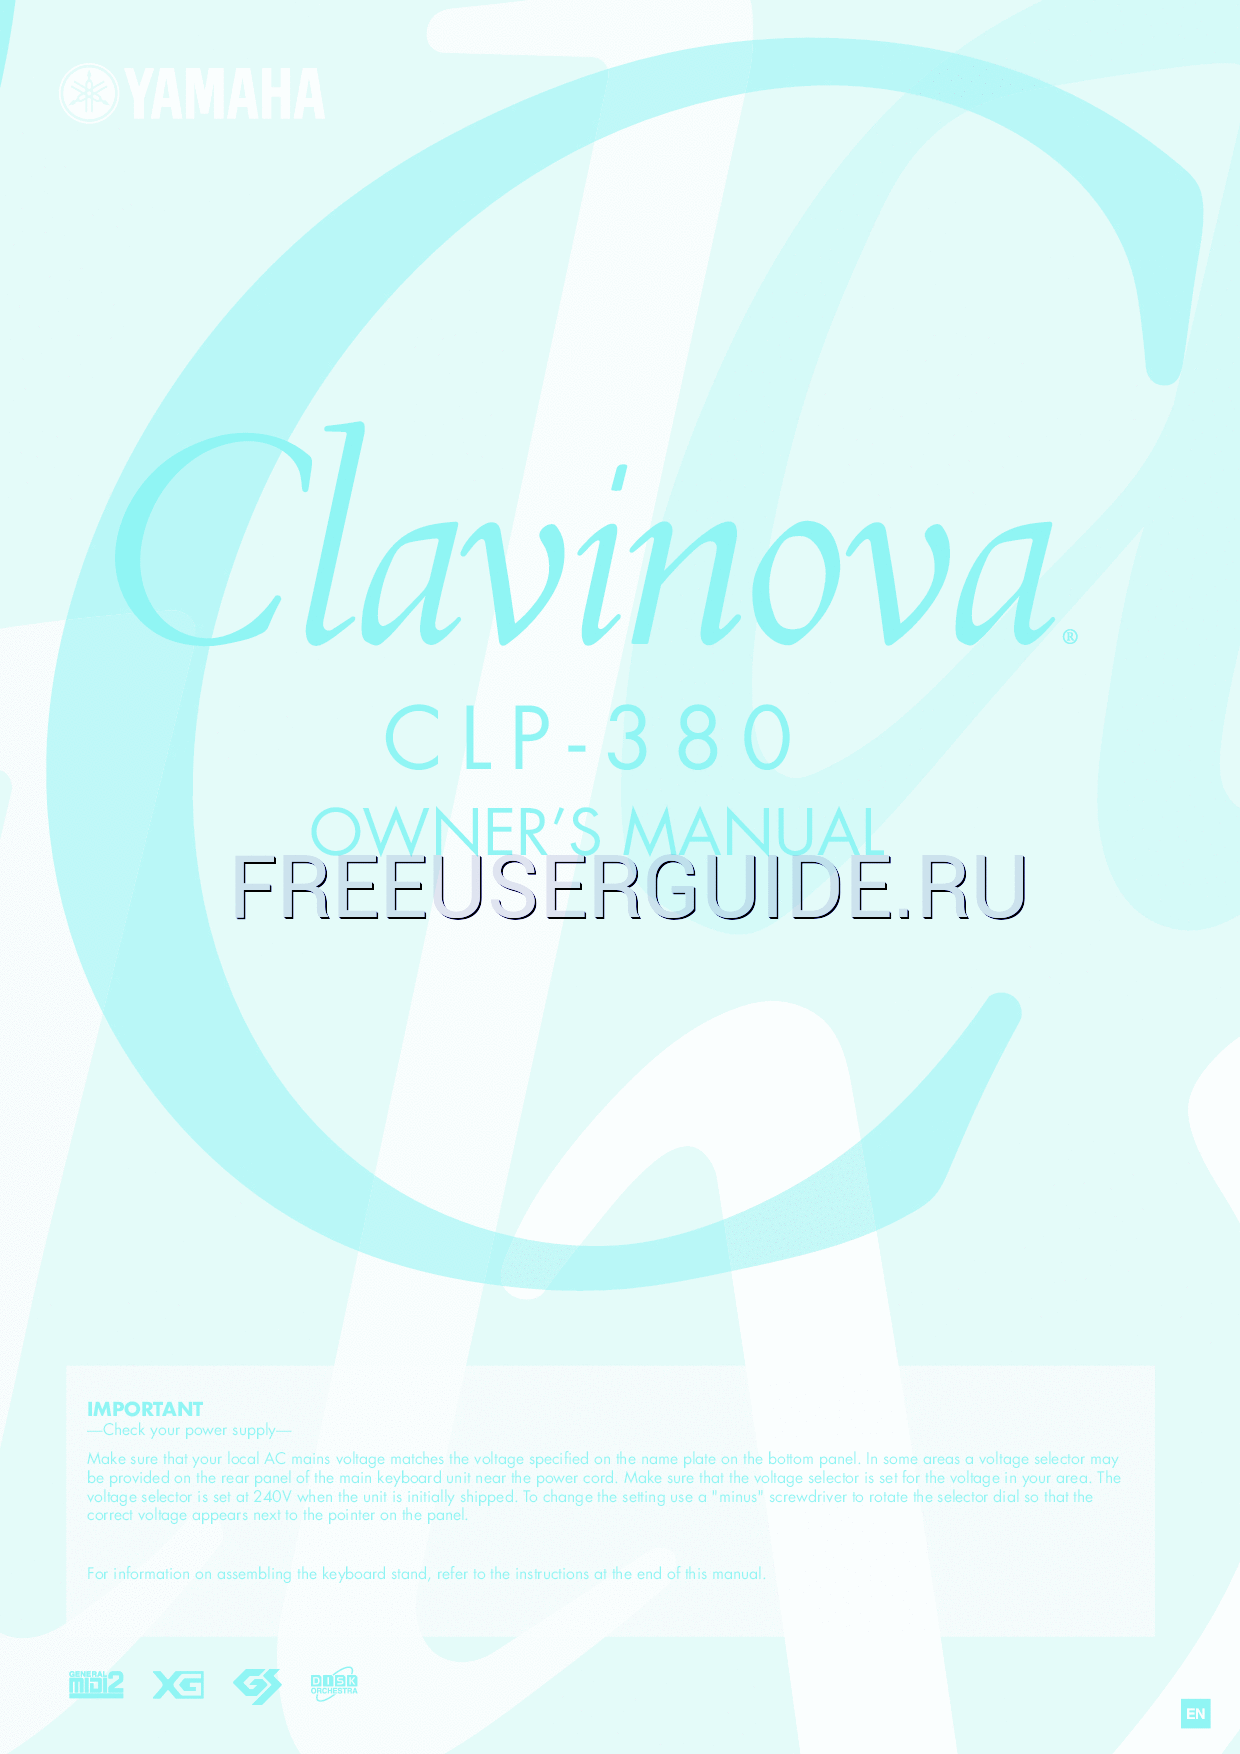 Read online User's Manual for Yamaha CLAVINOVA C L P - 3 8 0 (Page 1)